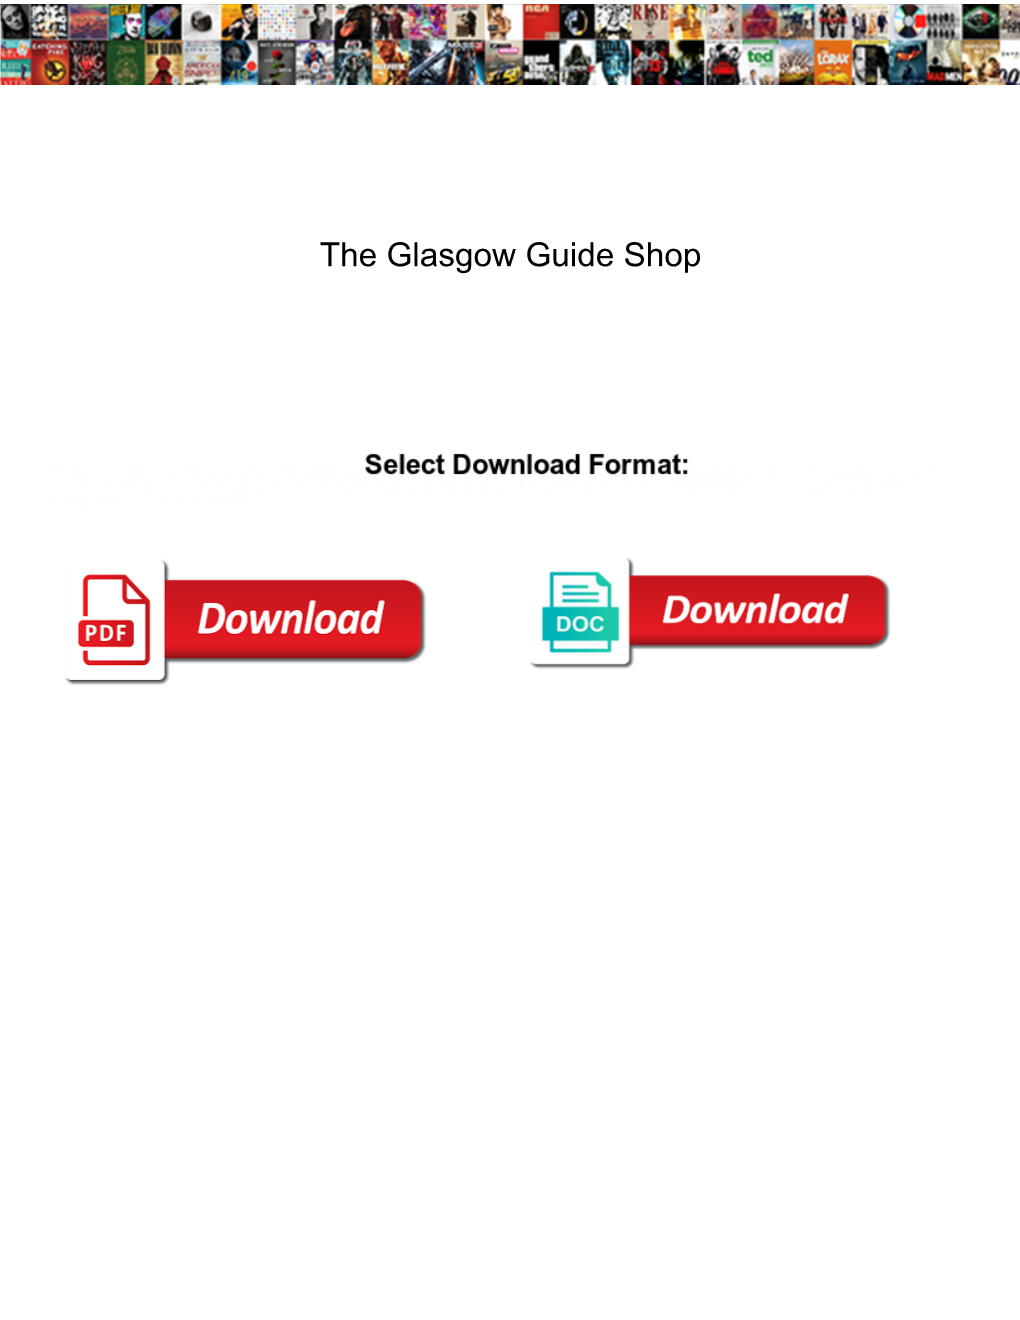 The Glasgow Guide Shop